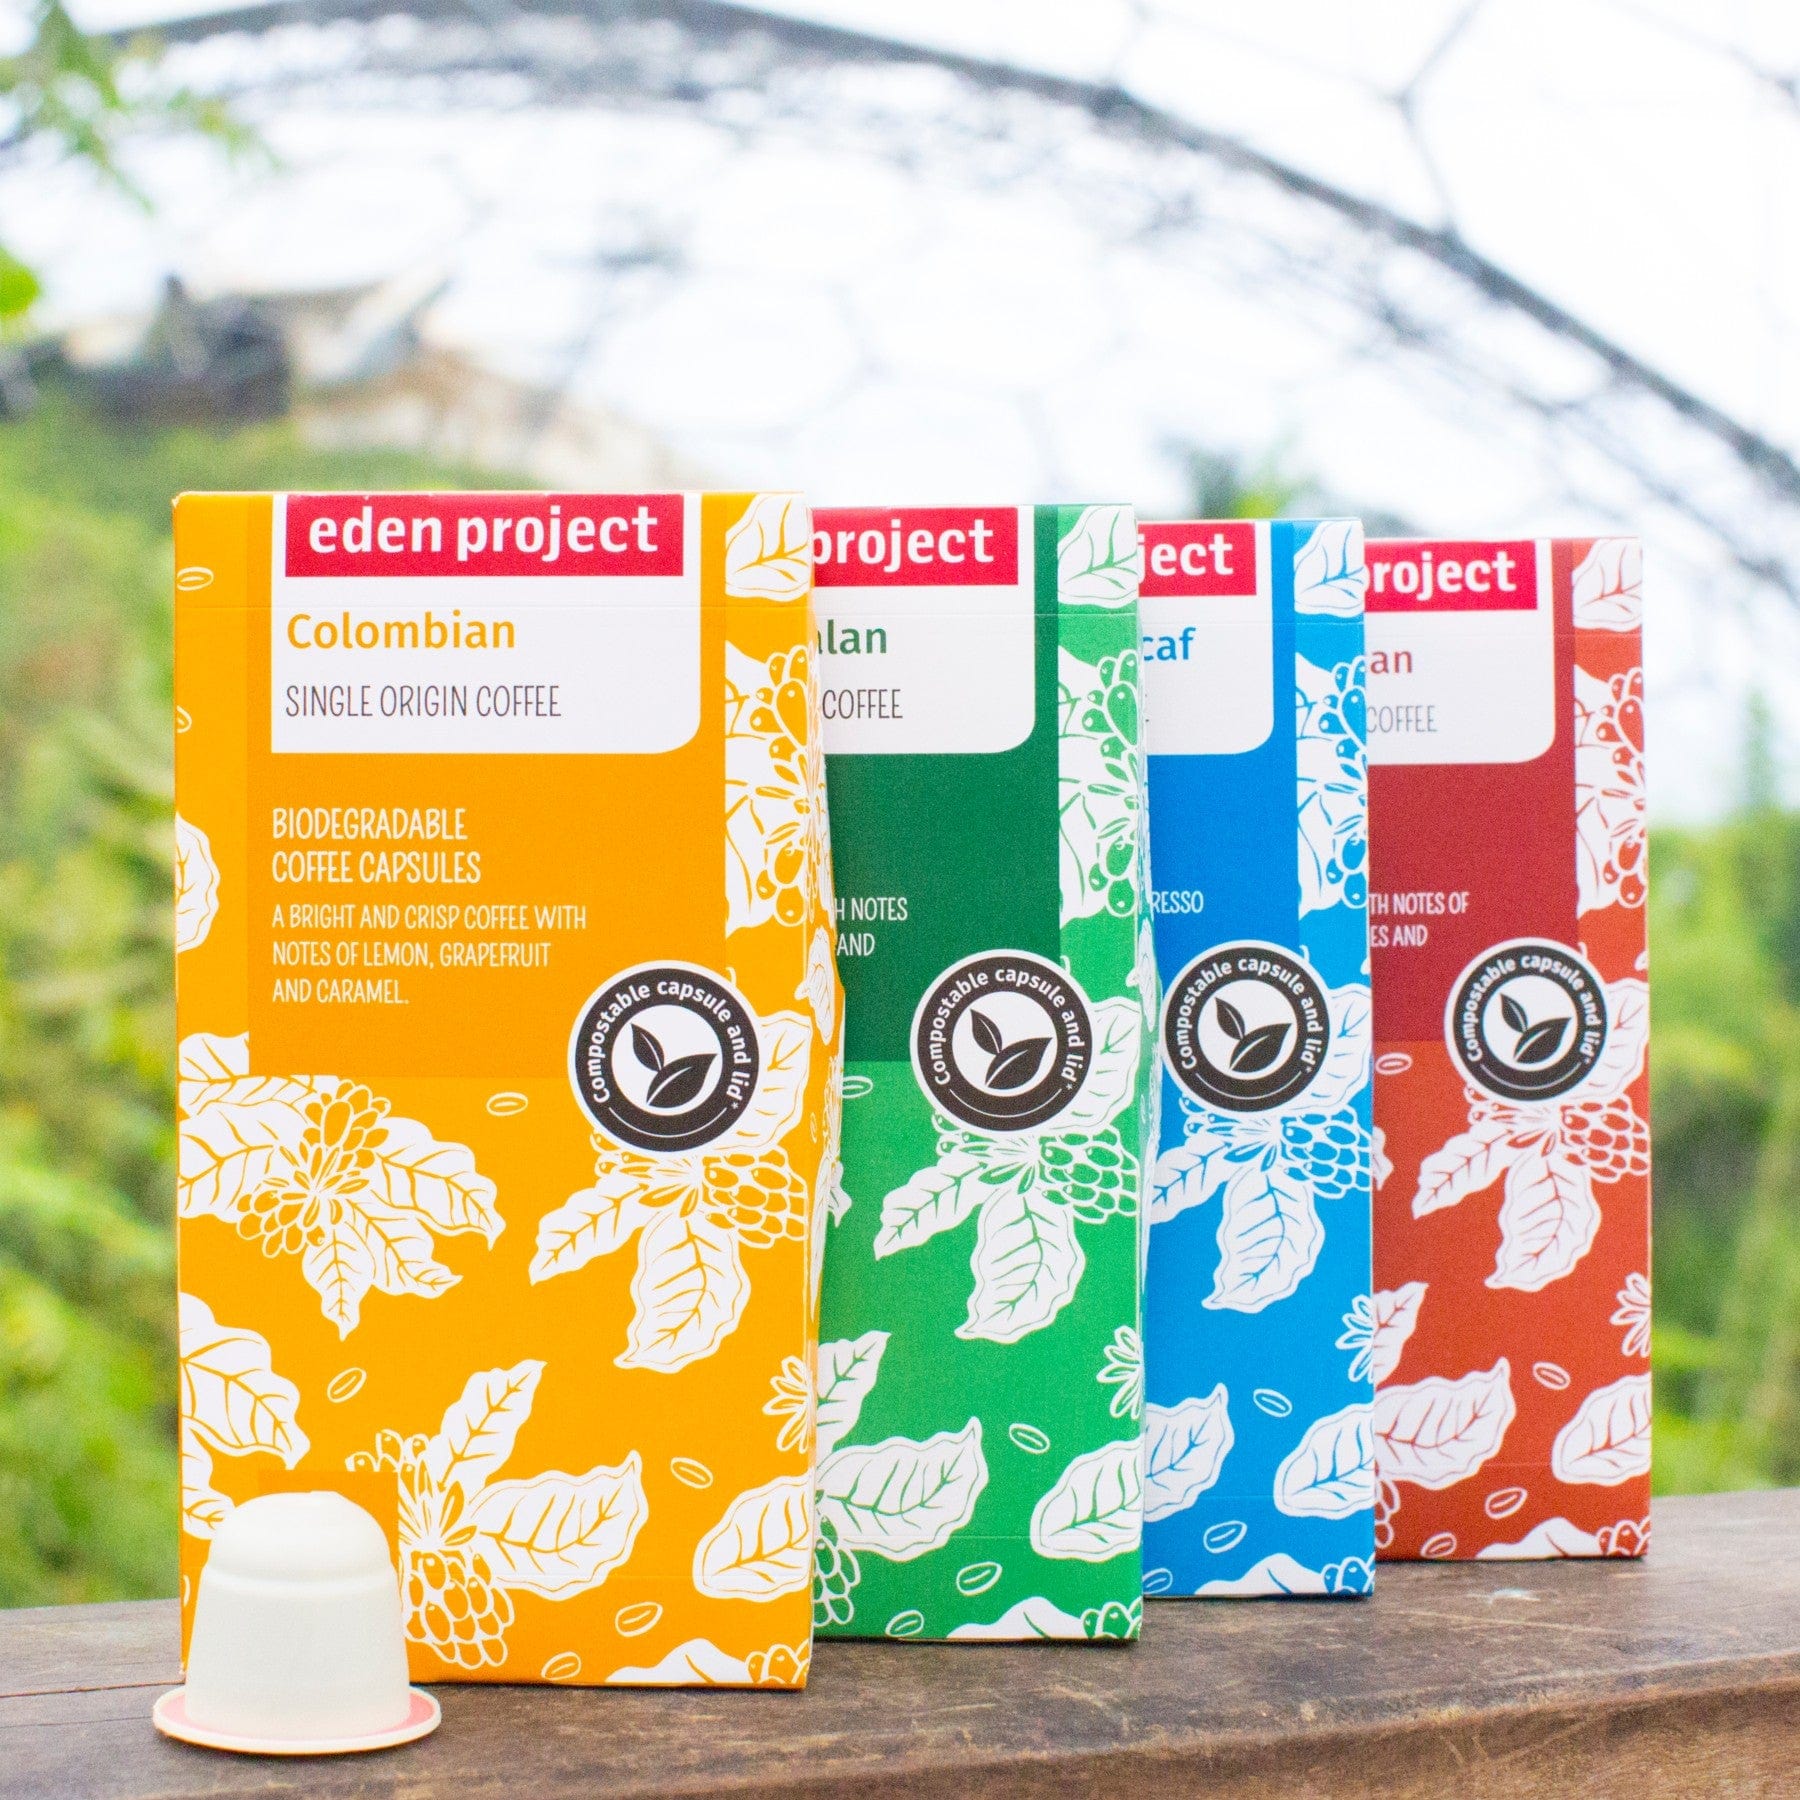 Assorted biodegradable coffee capsules by Eden Project in Colombian, Guatemalan, and decaf variations, with nature-inspired packaging design on a wooden surface outdoors.